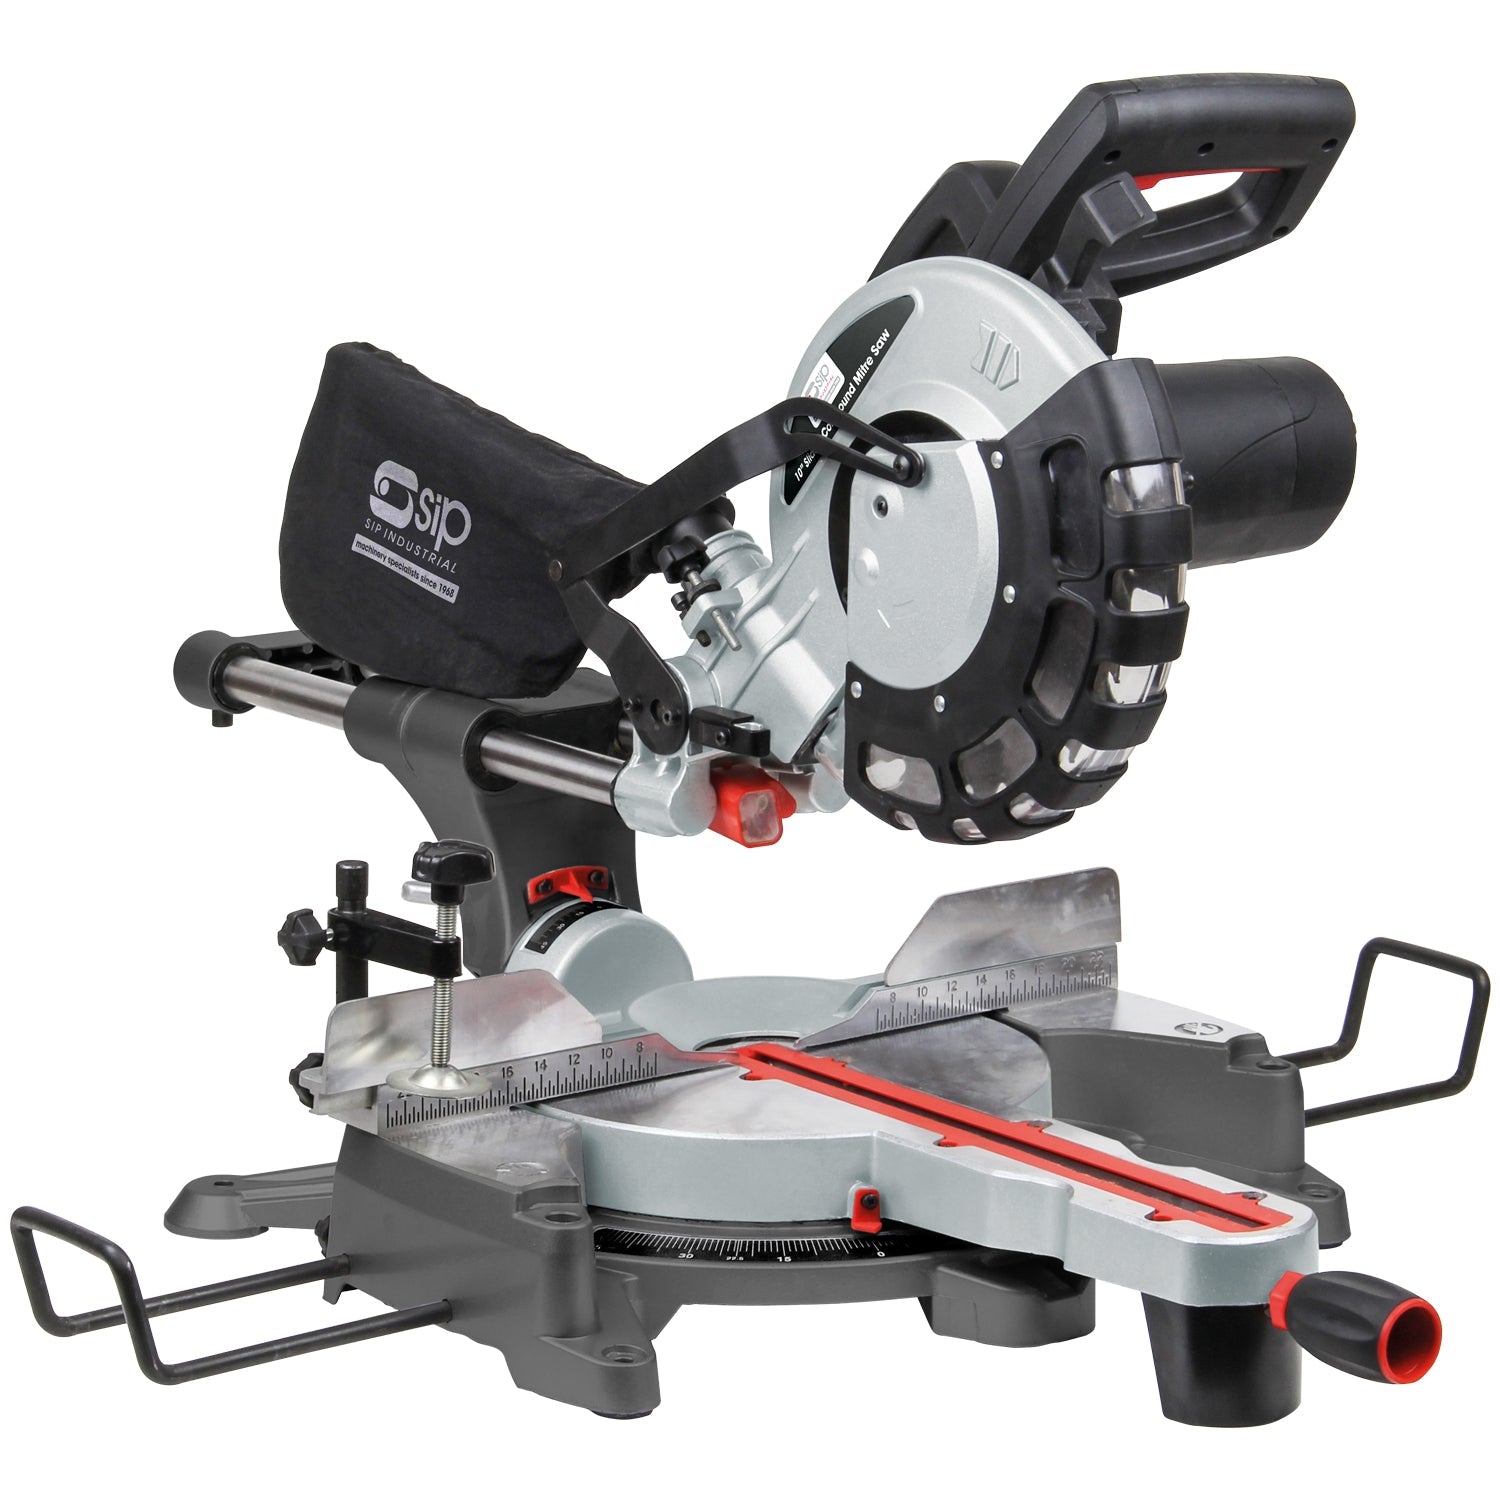 SIP 10" Sliding Compound Mitre Saw with Laser, Sip Industrial